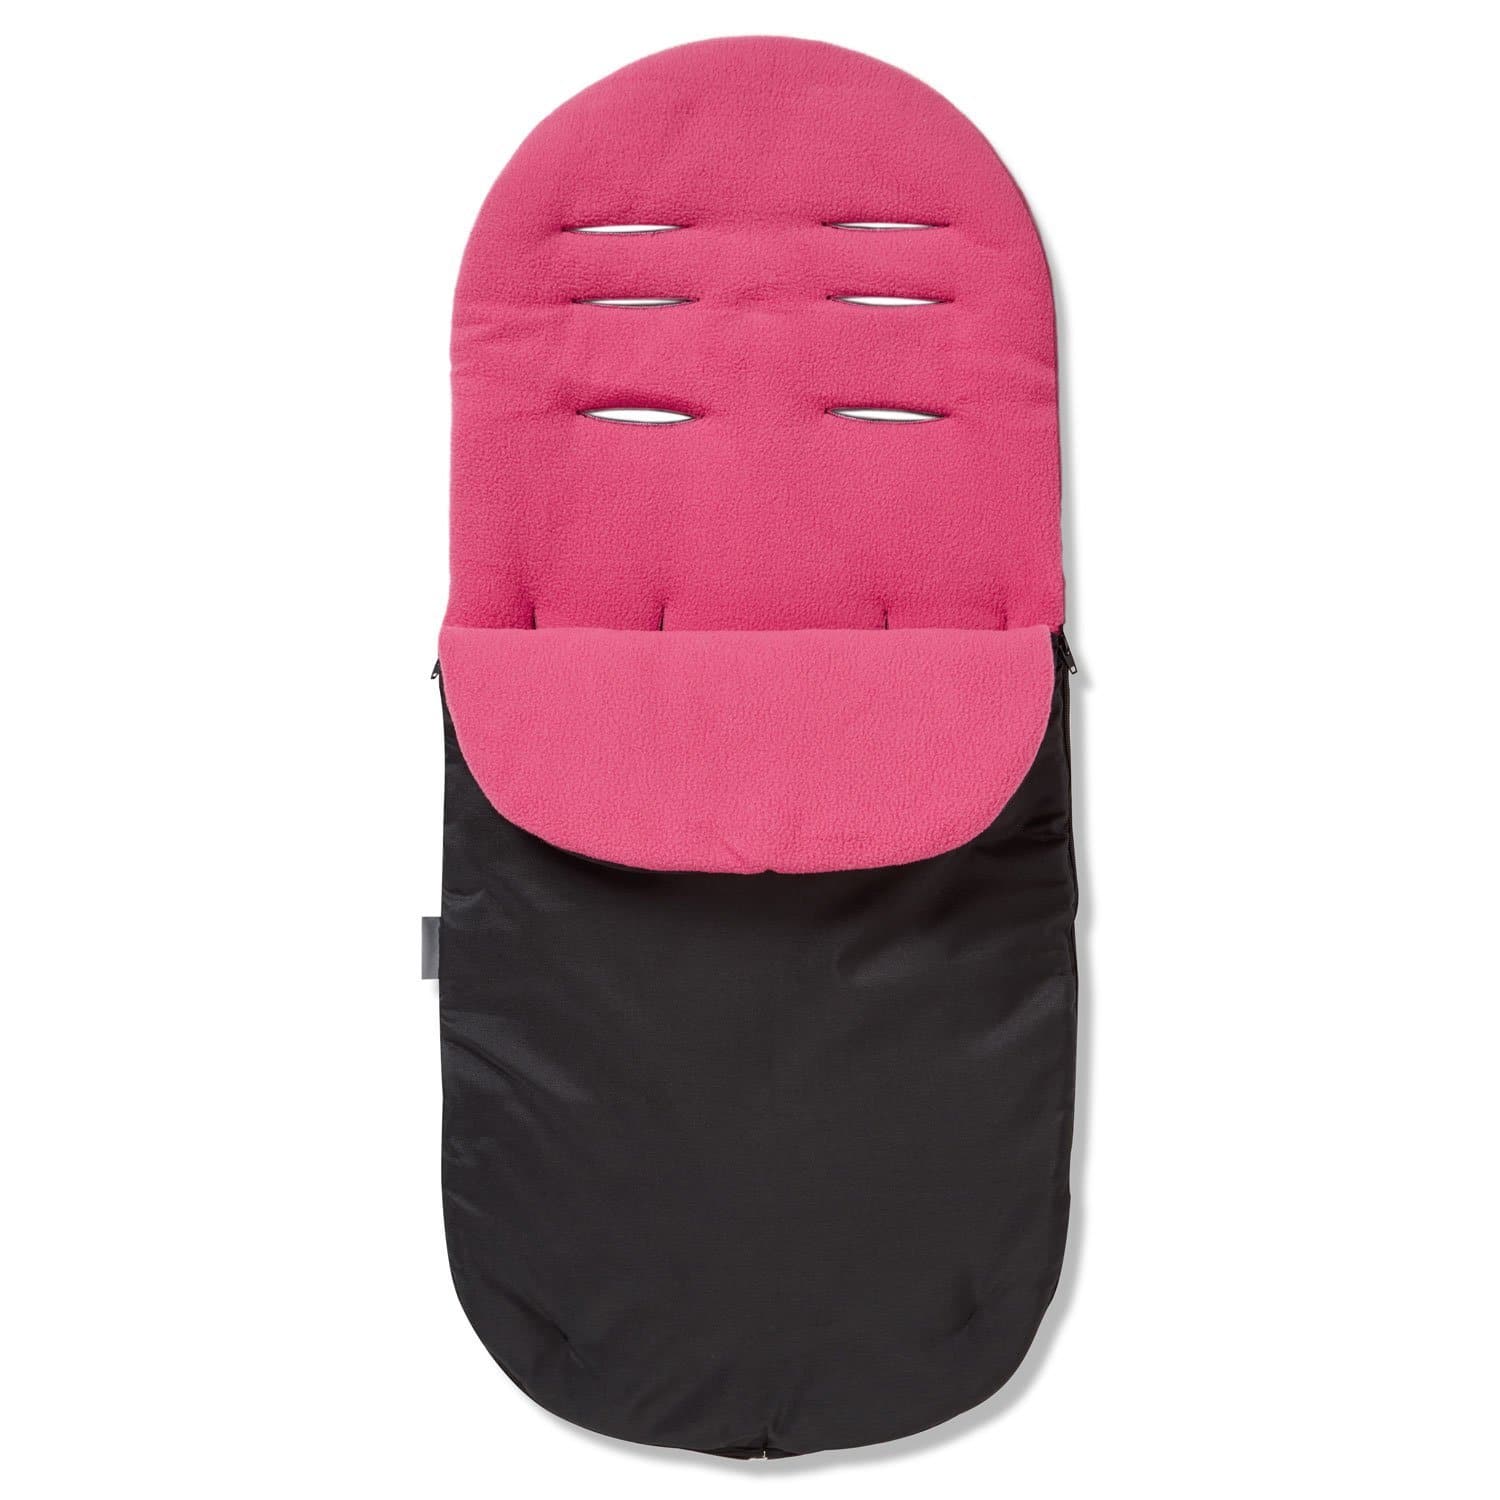 Footmuff / Cosy Toes Compatible with Valco - Dark Pink / Fits All Models | For Your Little One